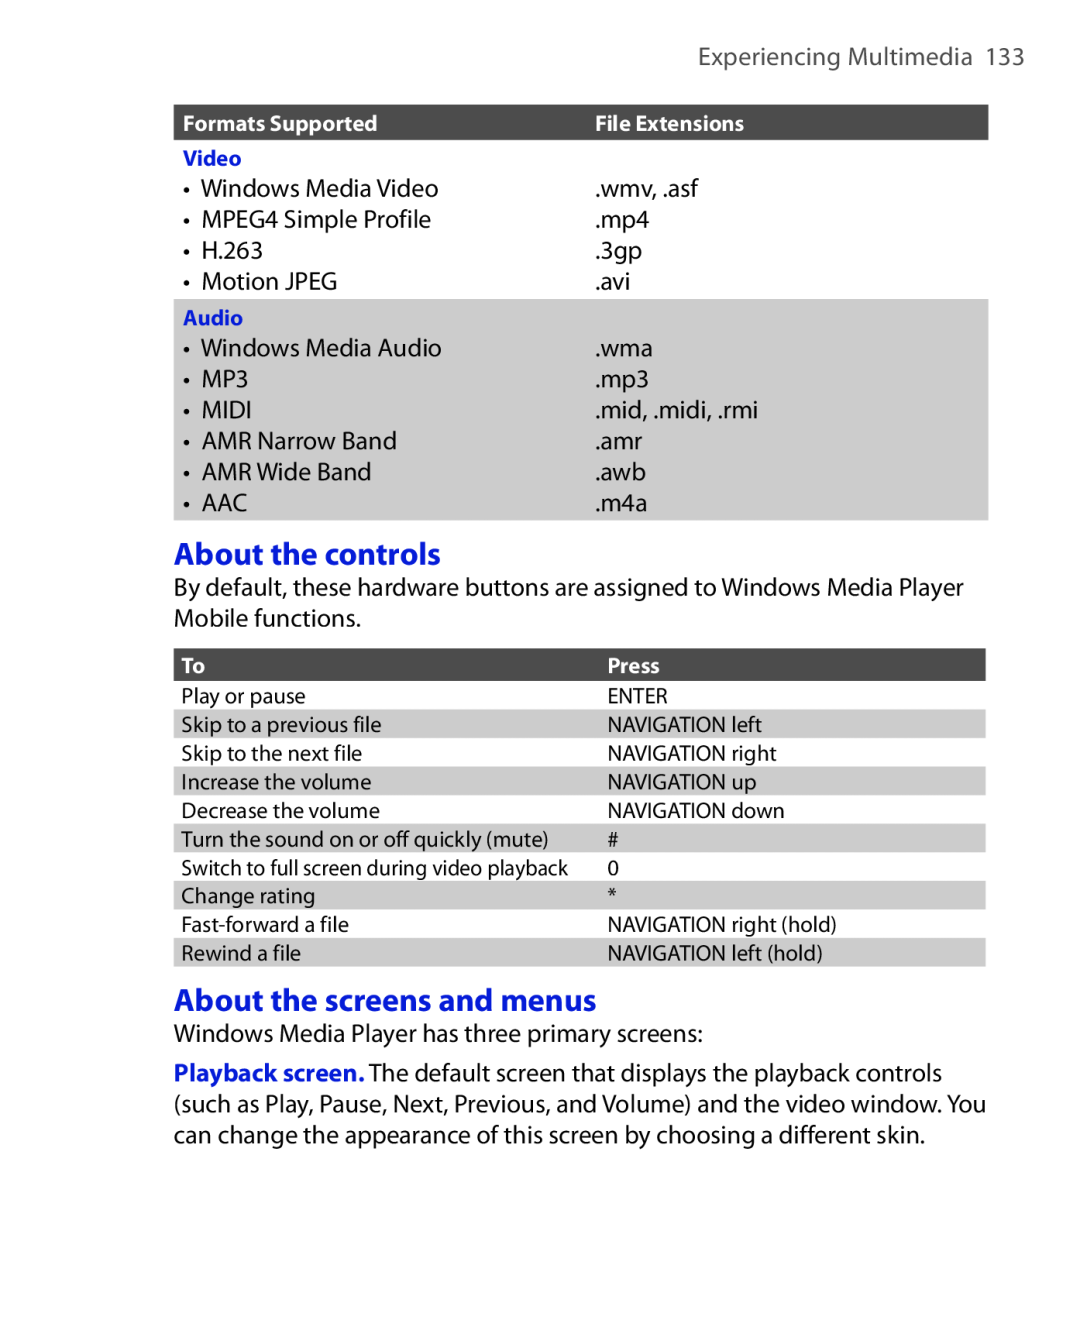 HTC HTC S621 user manual About the controls, About the screens and menus, Experiencing Multimedia 